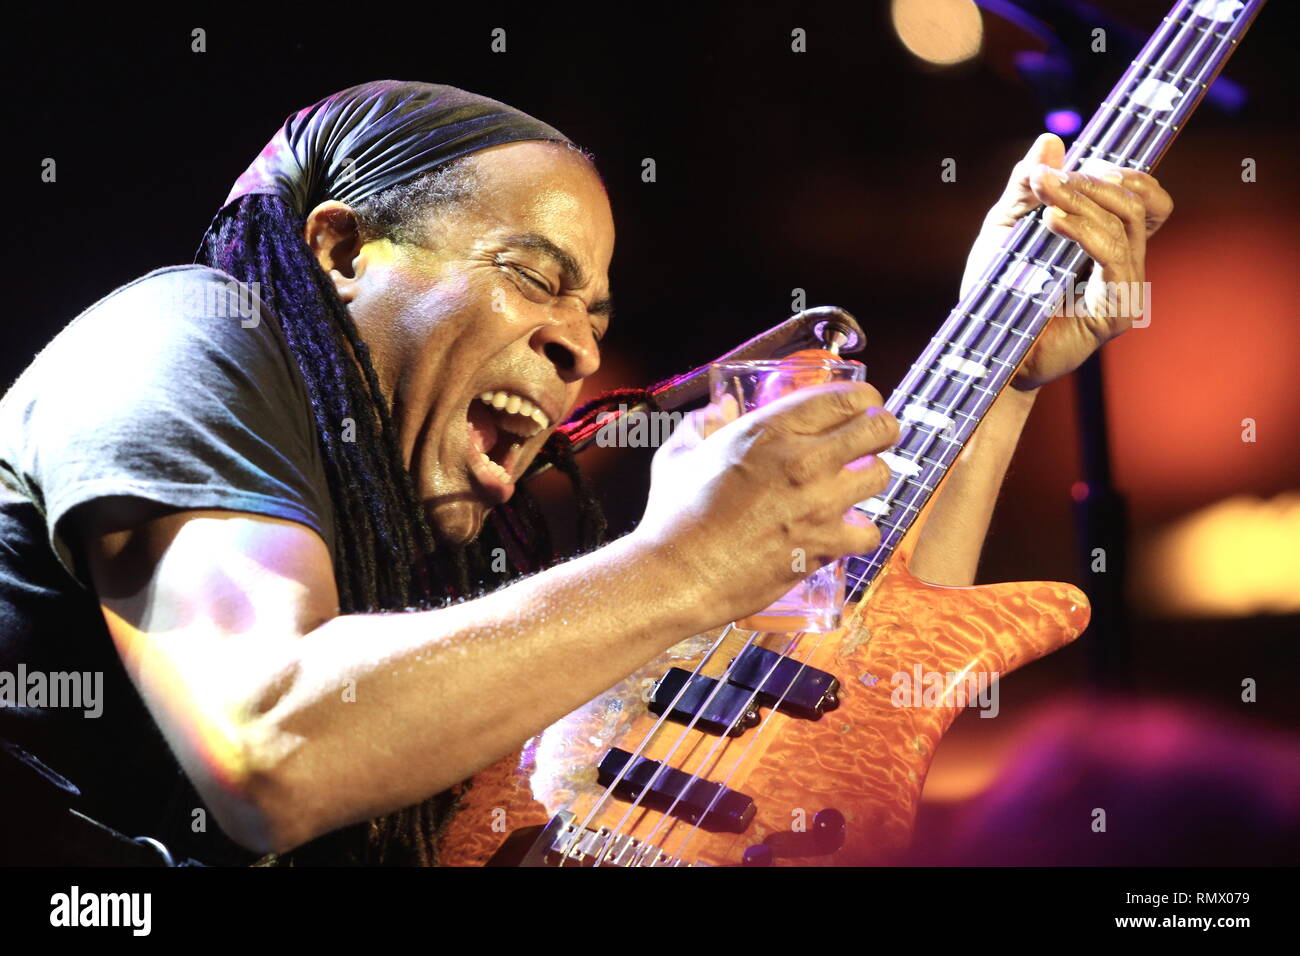 Bassist Doug Wimbish is shown performing on stage during a 'live' concert appearance with Living Colour. Stock Photo